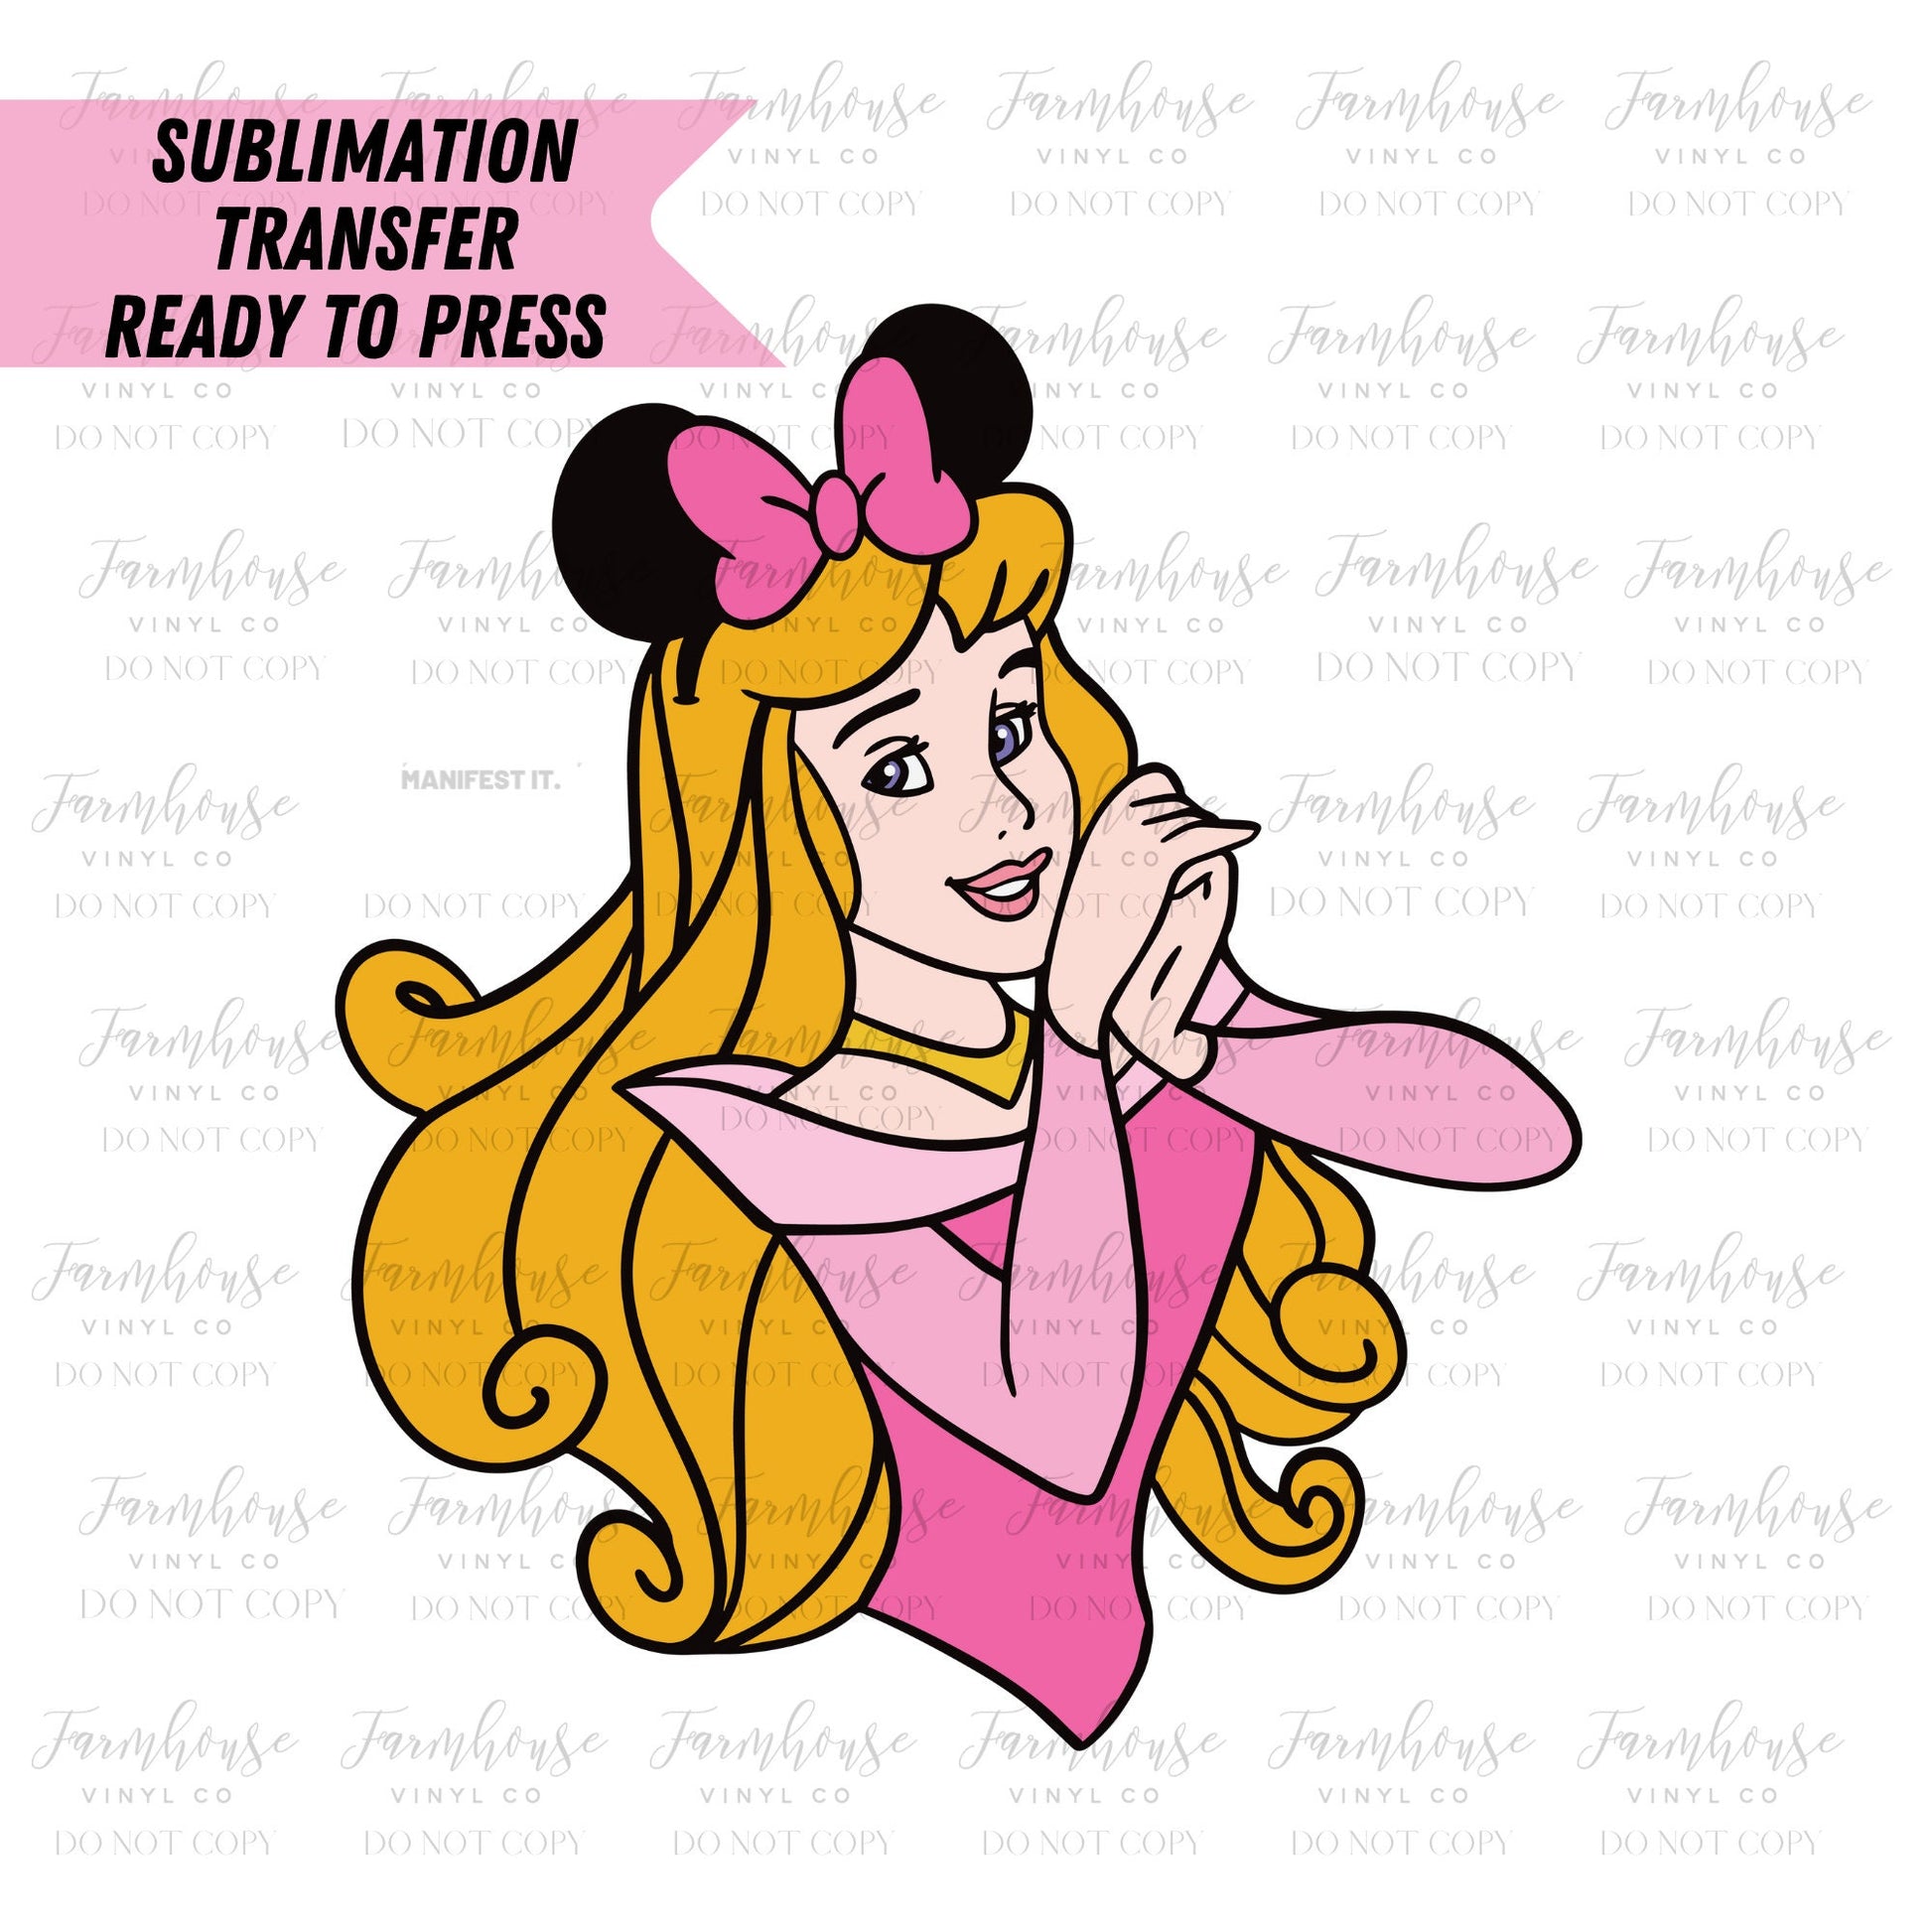 Colorful Watercolor Princess Design, Ready To Press Sublimation Transfer, 50 Years of Magic, Magical Vacation, Sublimate Prints, Heat Design - Farmhouse Vinyl Co